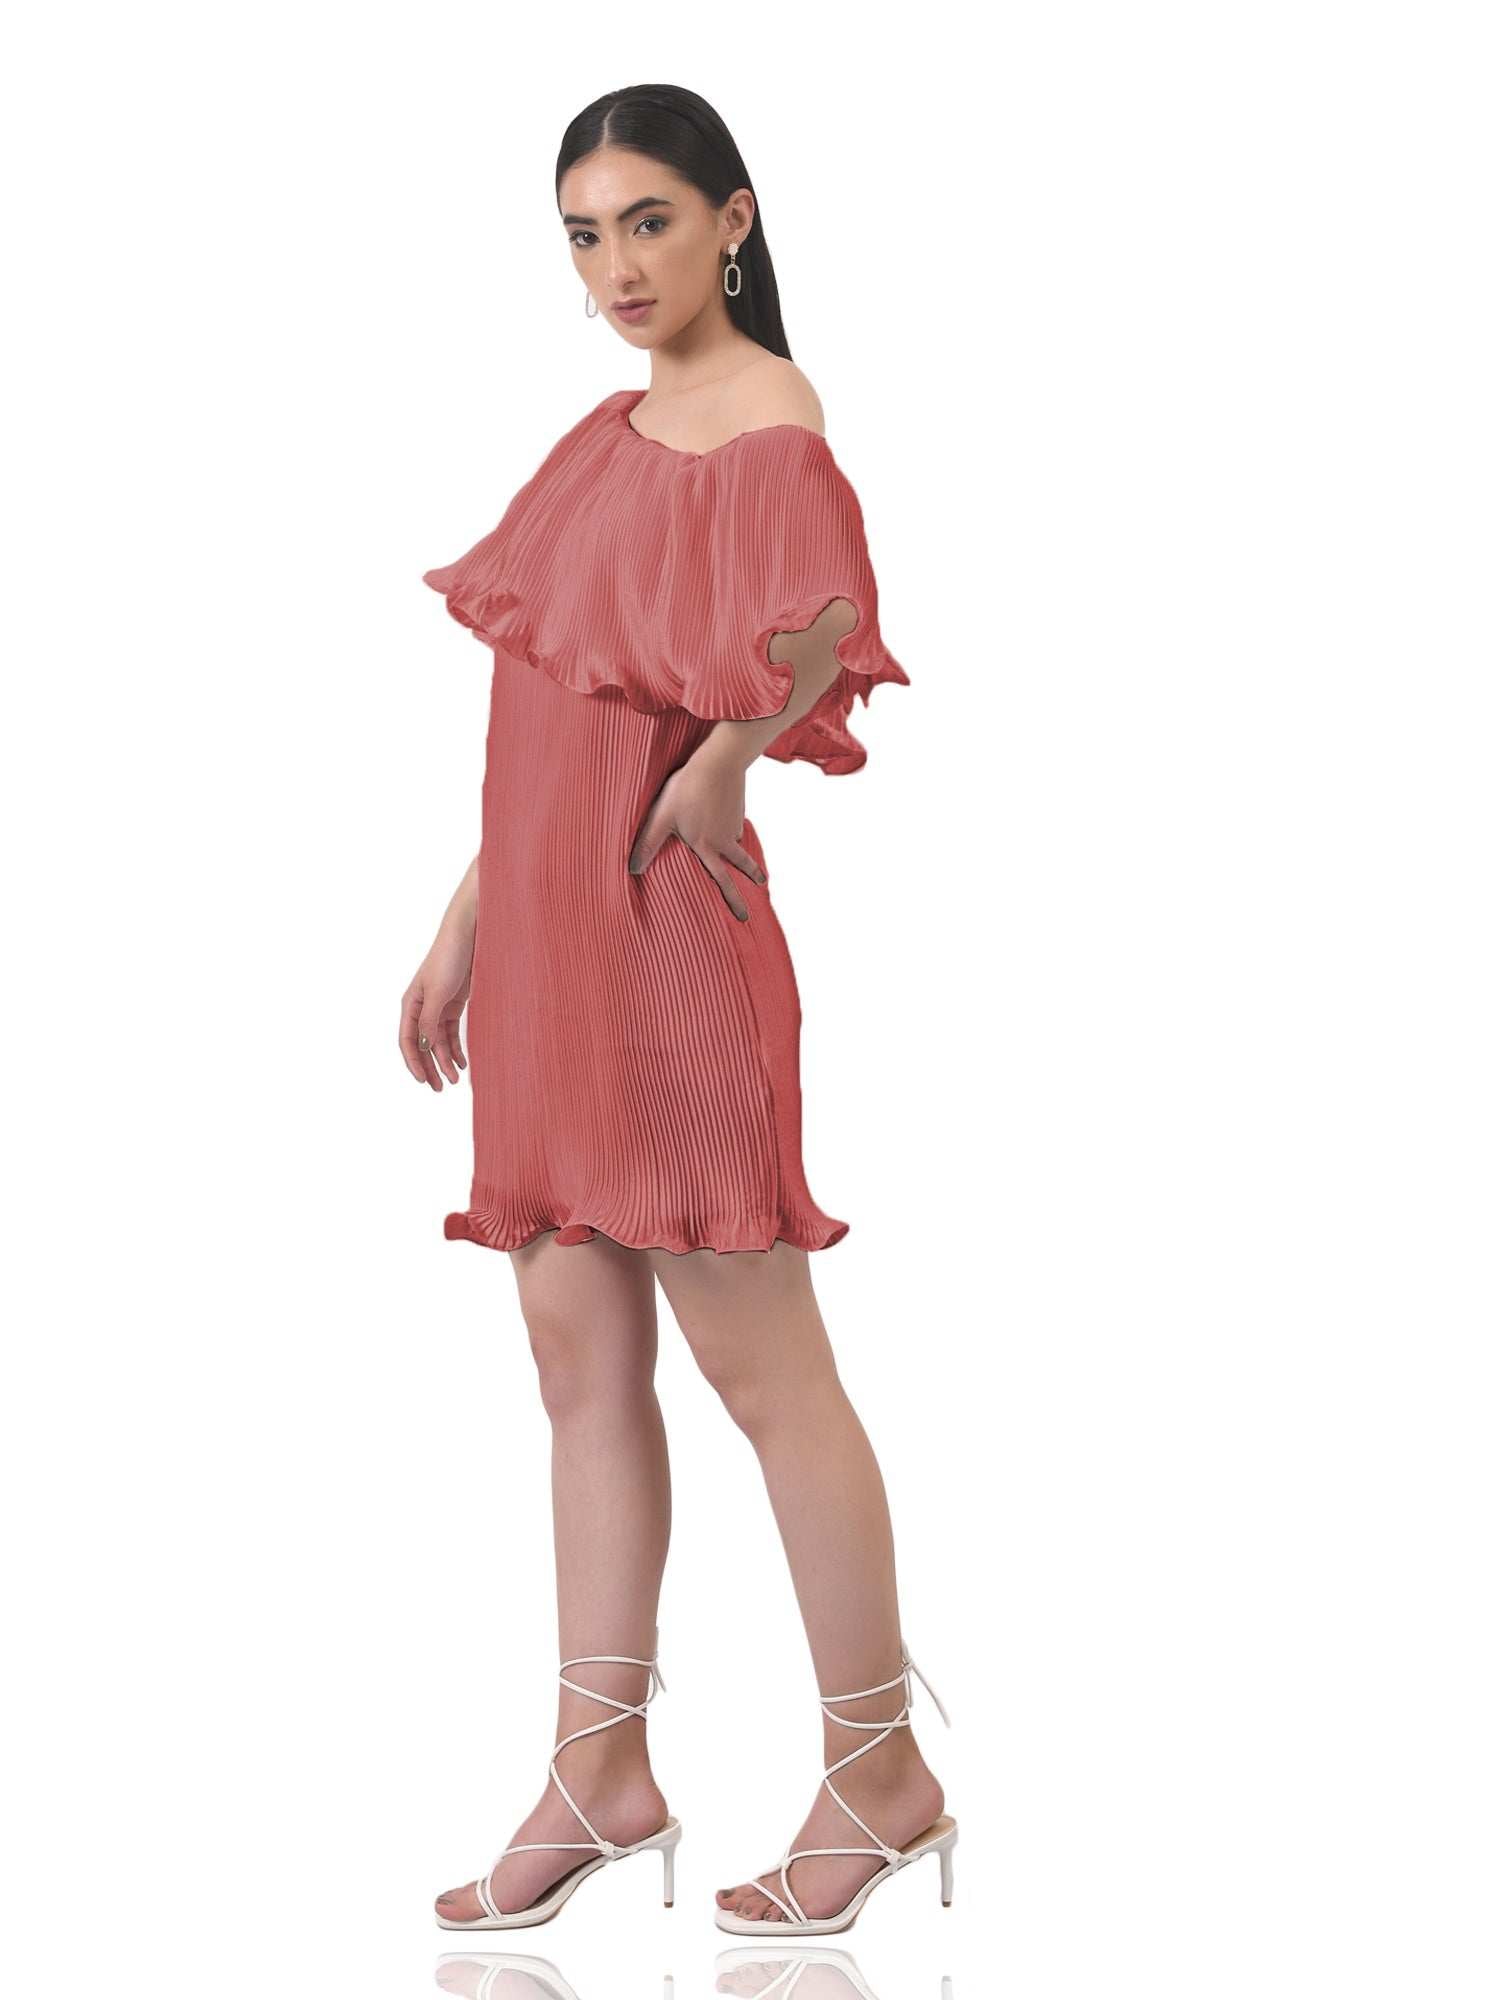 copy of brown imaginative pleated pink dress